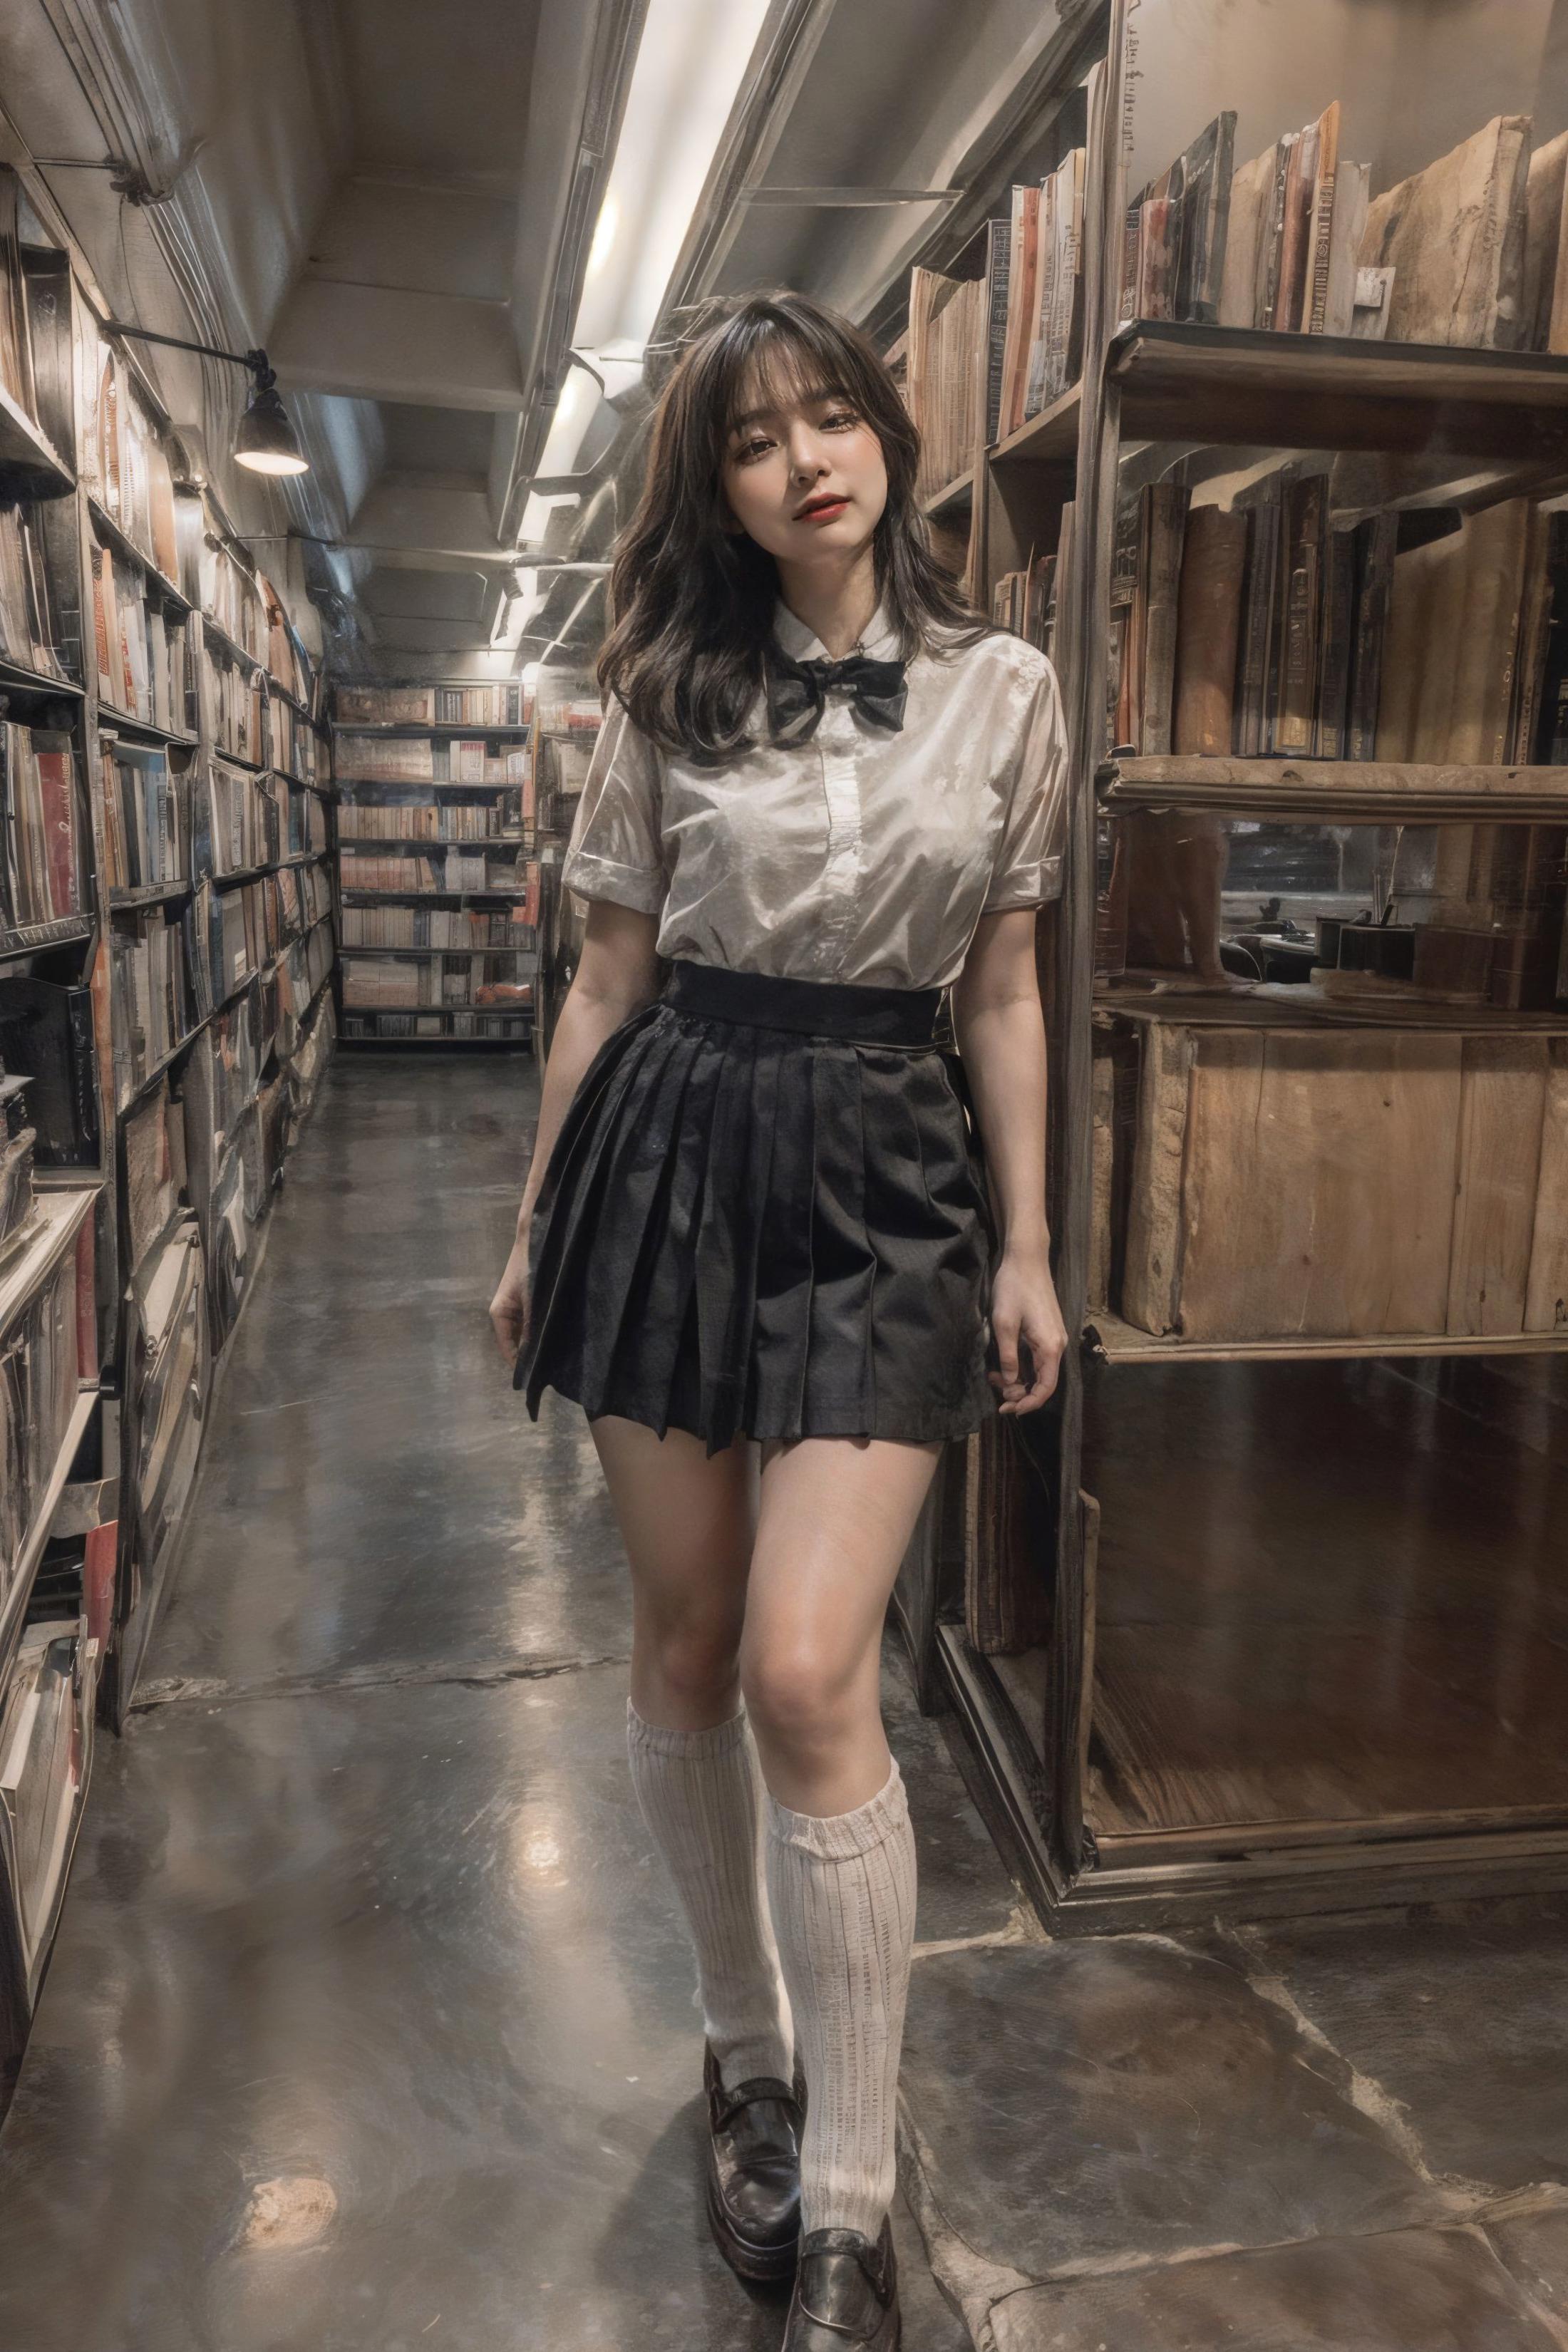 A woman in a white shirt and black skirt standing in a library surrounded by books.